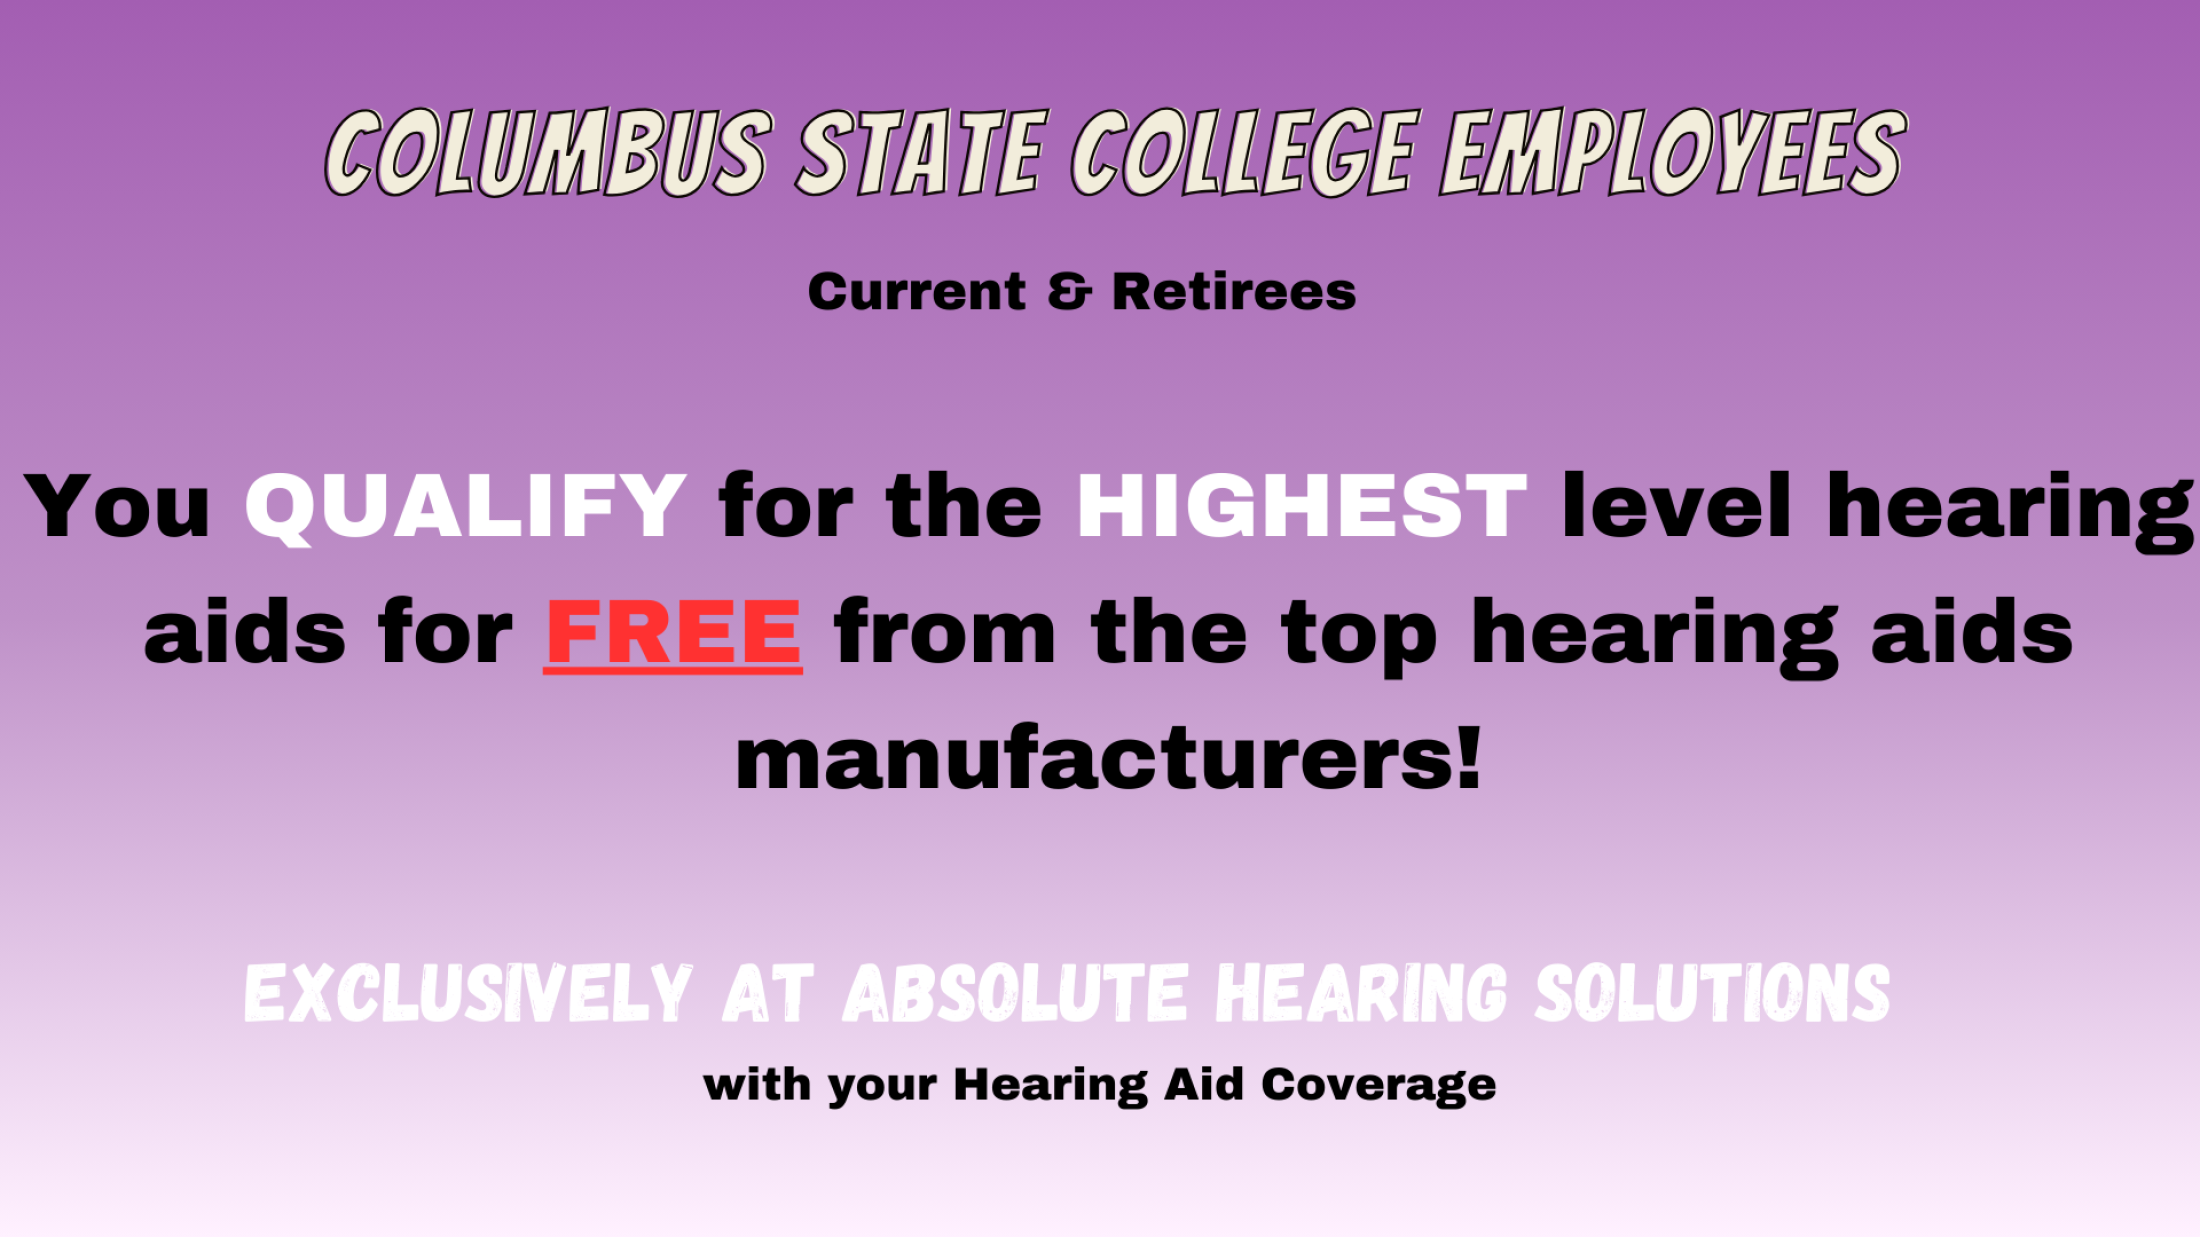 Columbus State College Employees qualify for the highest level hearing aids for FREE